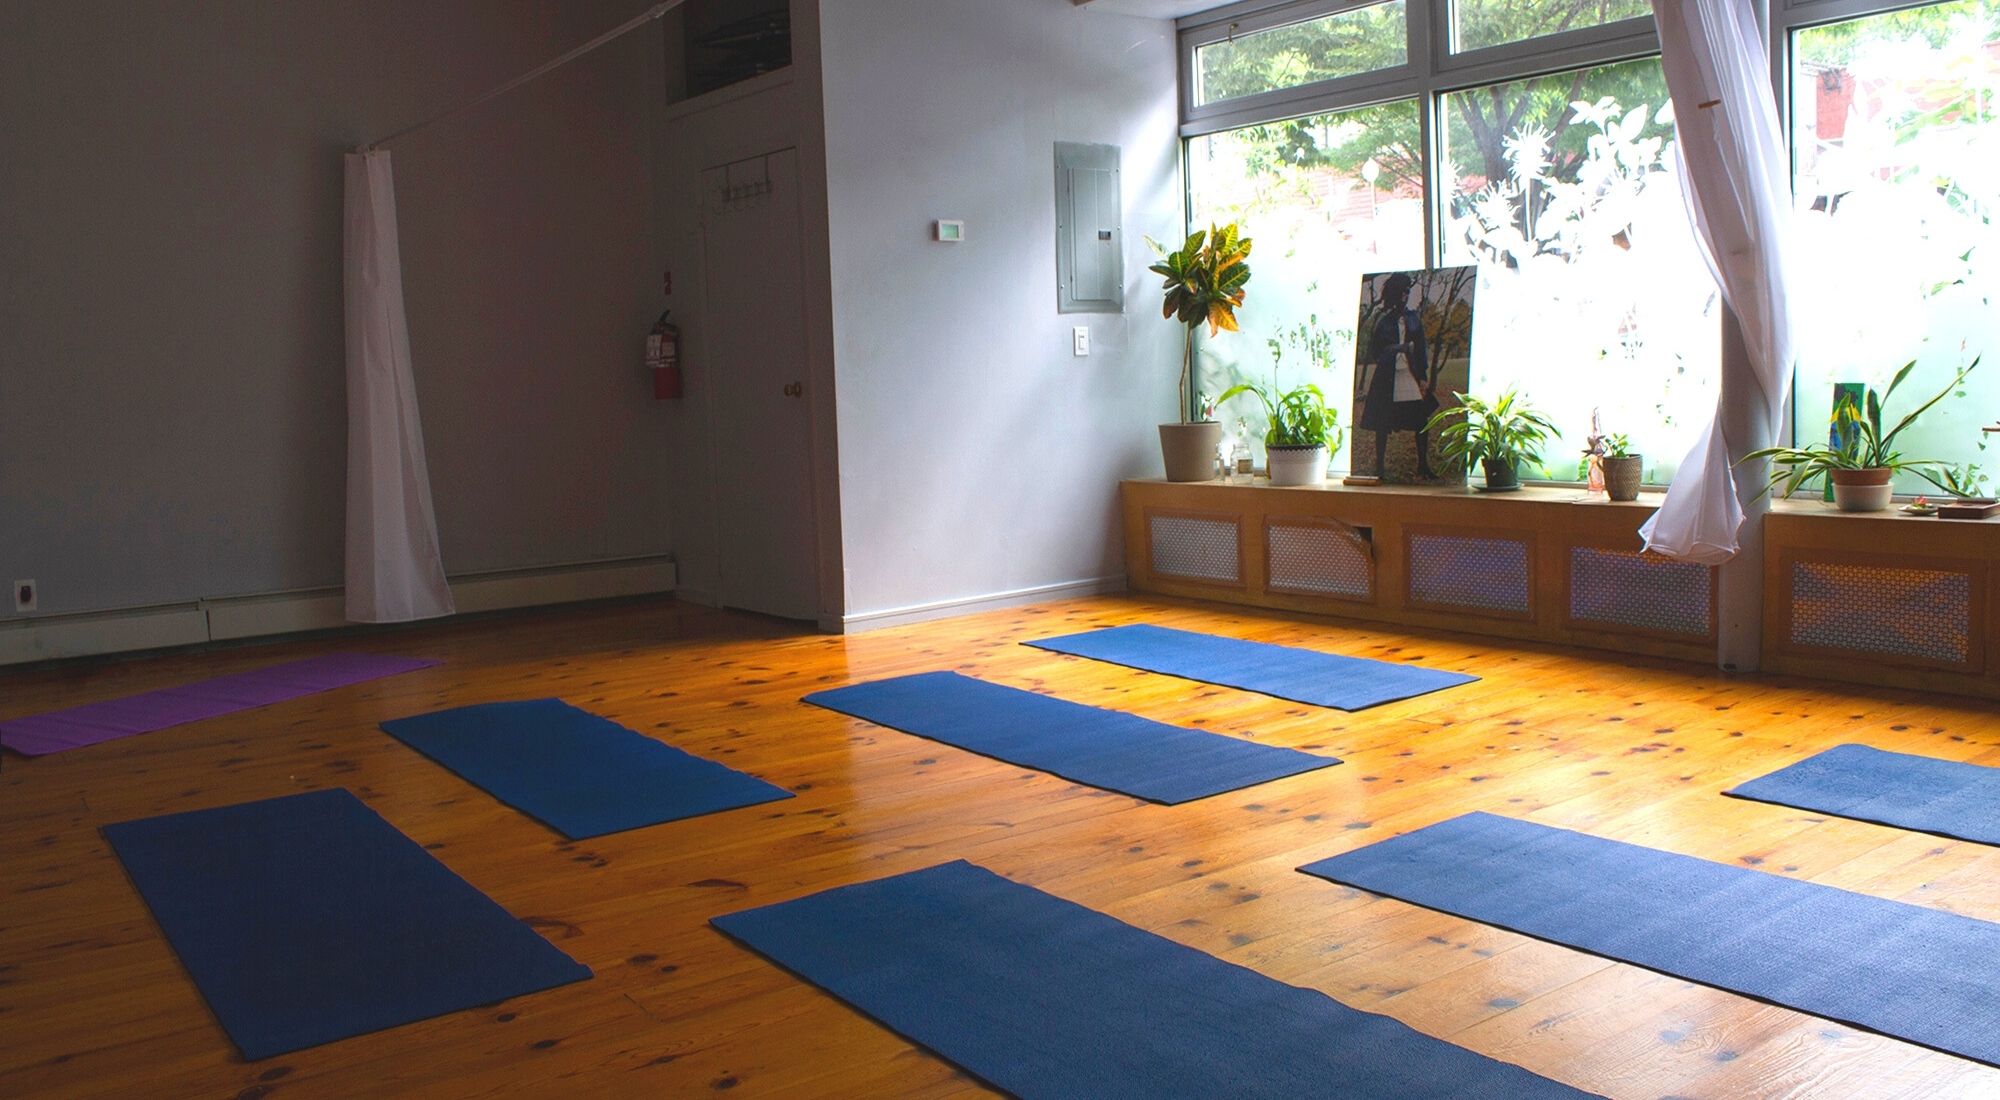 An image of Third Root's yoga room, with wood floors covered in blue yoga mats, with the windows on the right